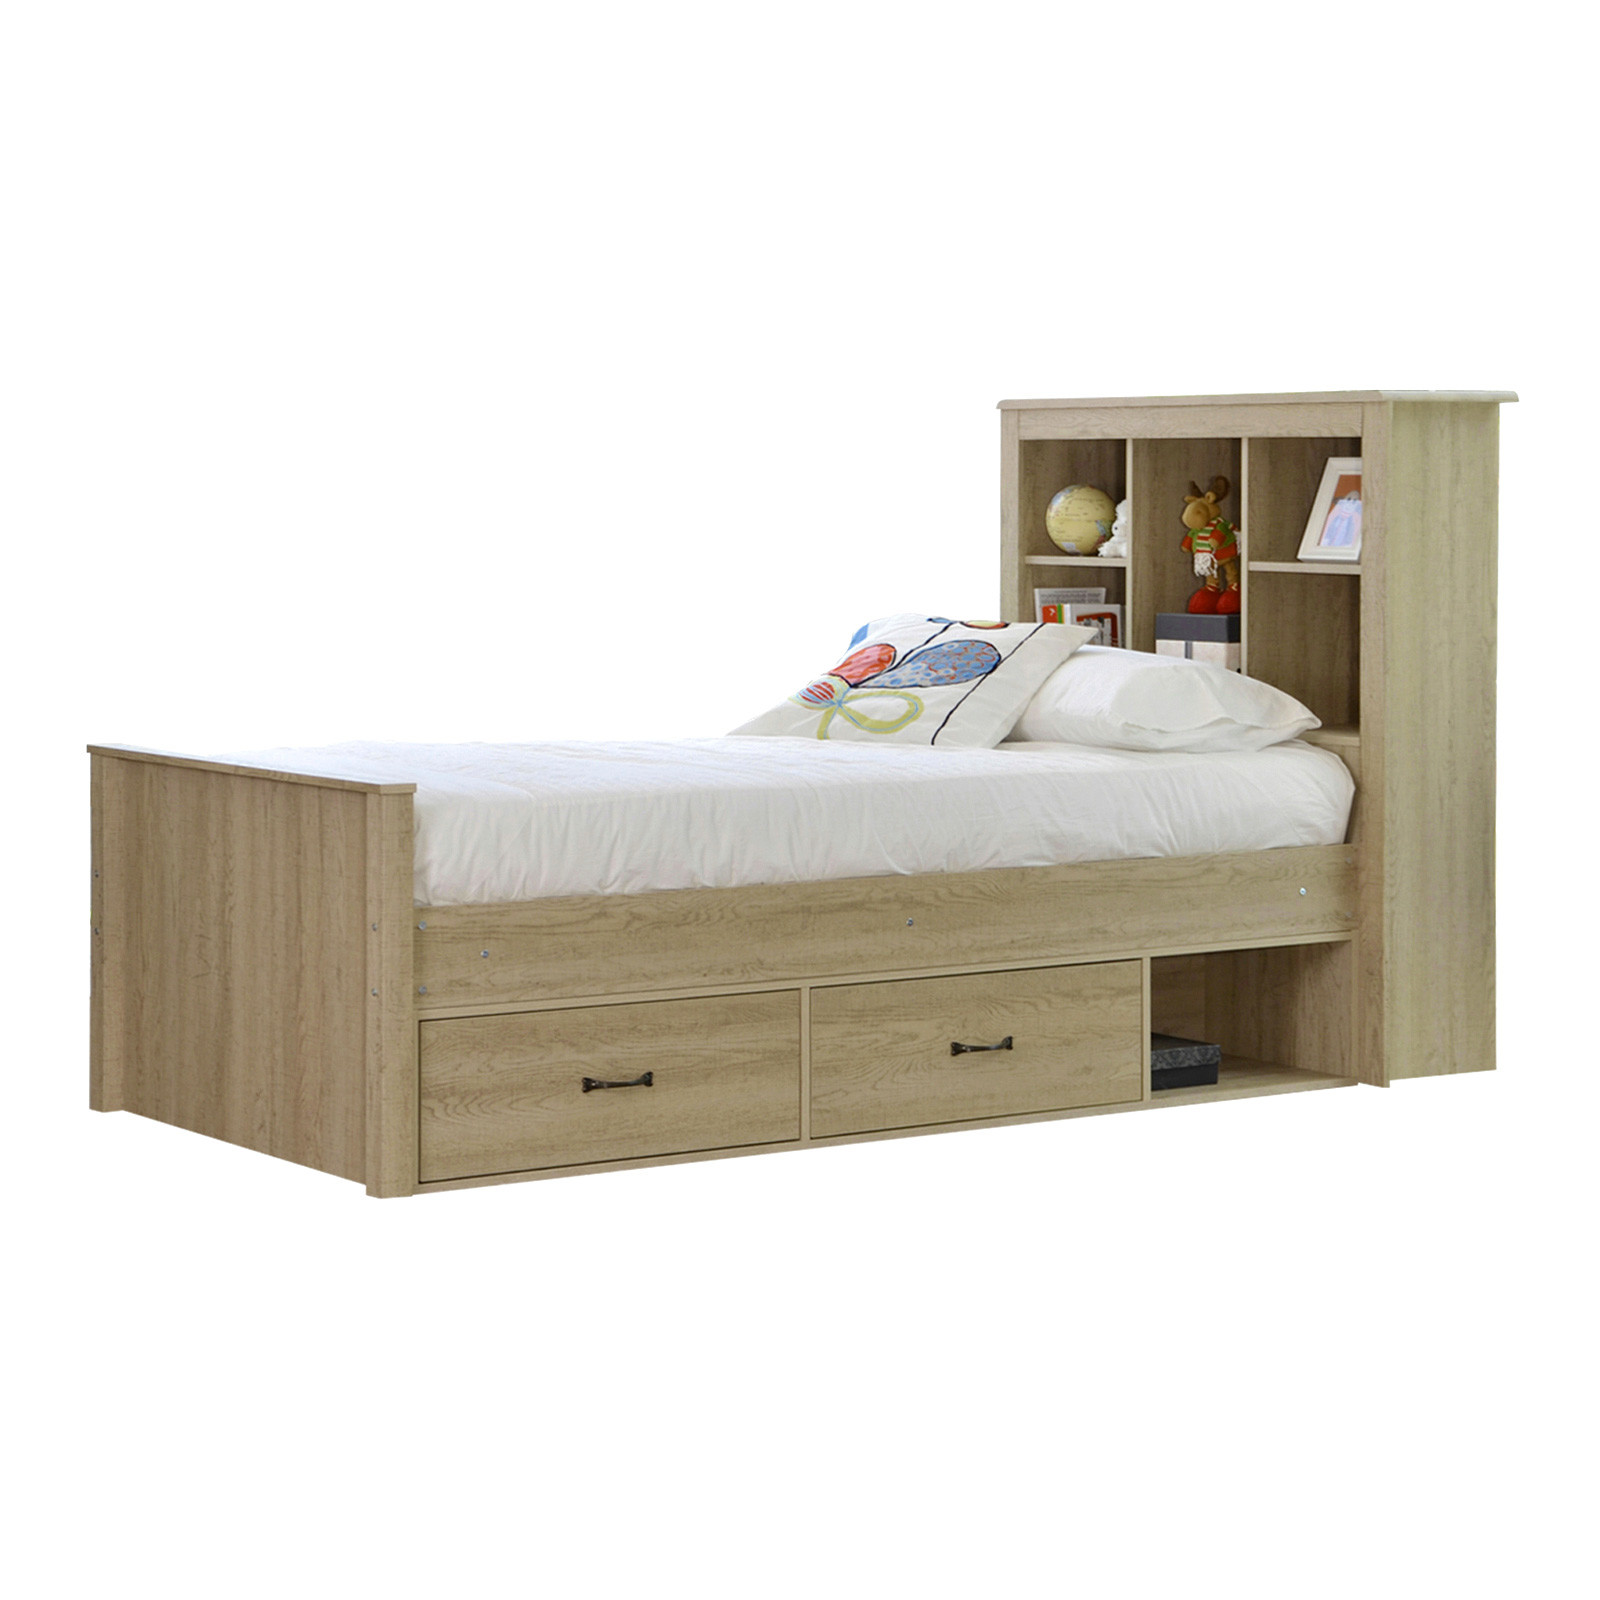 Vic Furniture Jeppe Oak King Single Bed, King Size Bed Frame With Storage And Bookcase Headboard